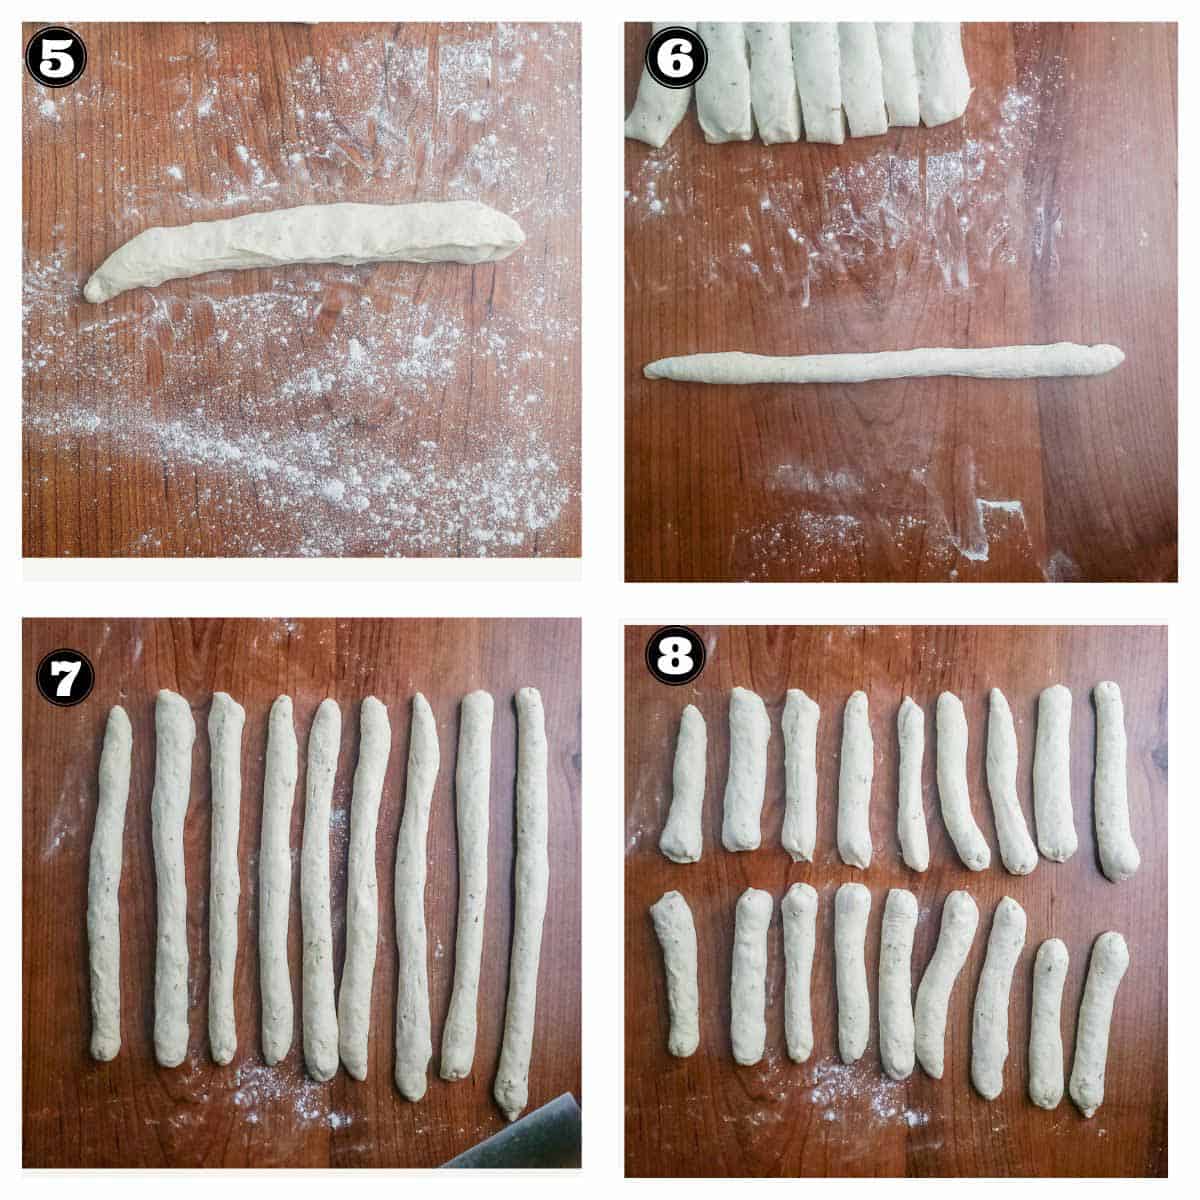 stages of shaping the breadsticks